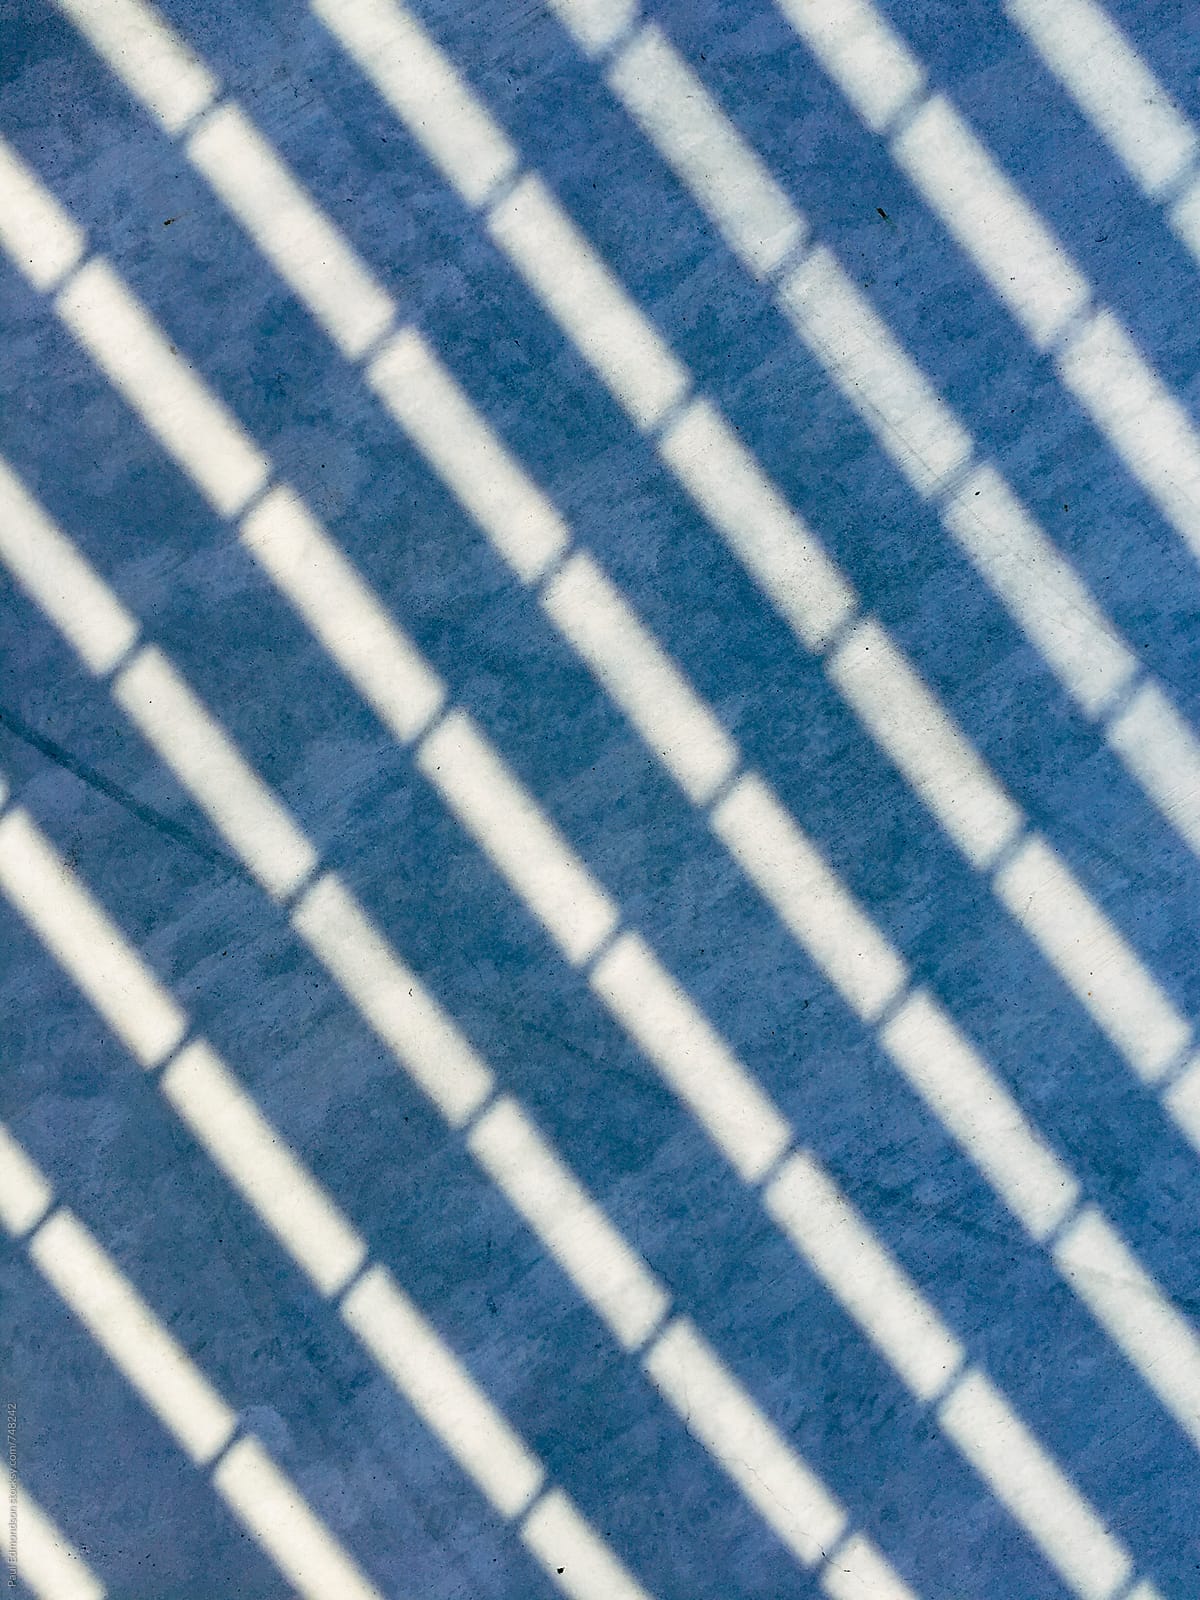 Graphic shadows and lines on concrete sidewalk